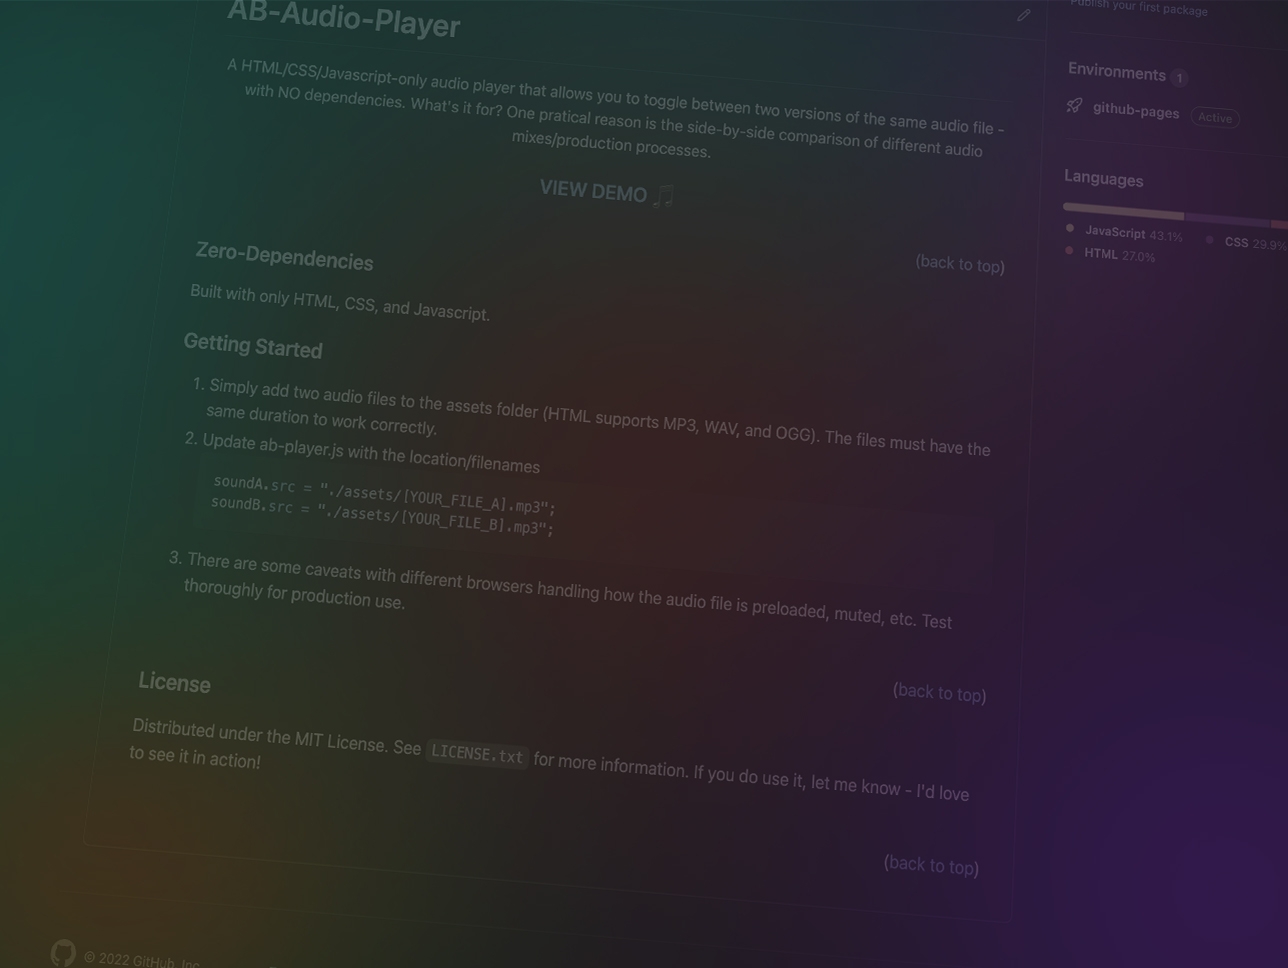 A/B Audio Player Background